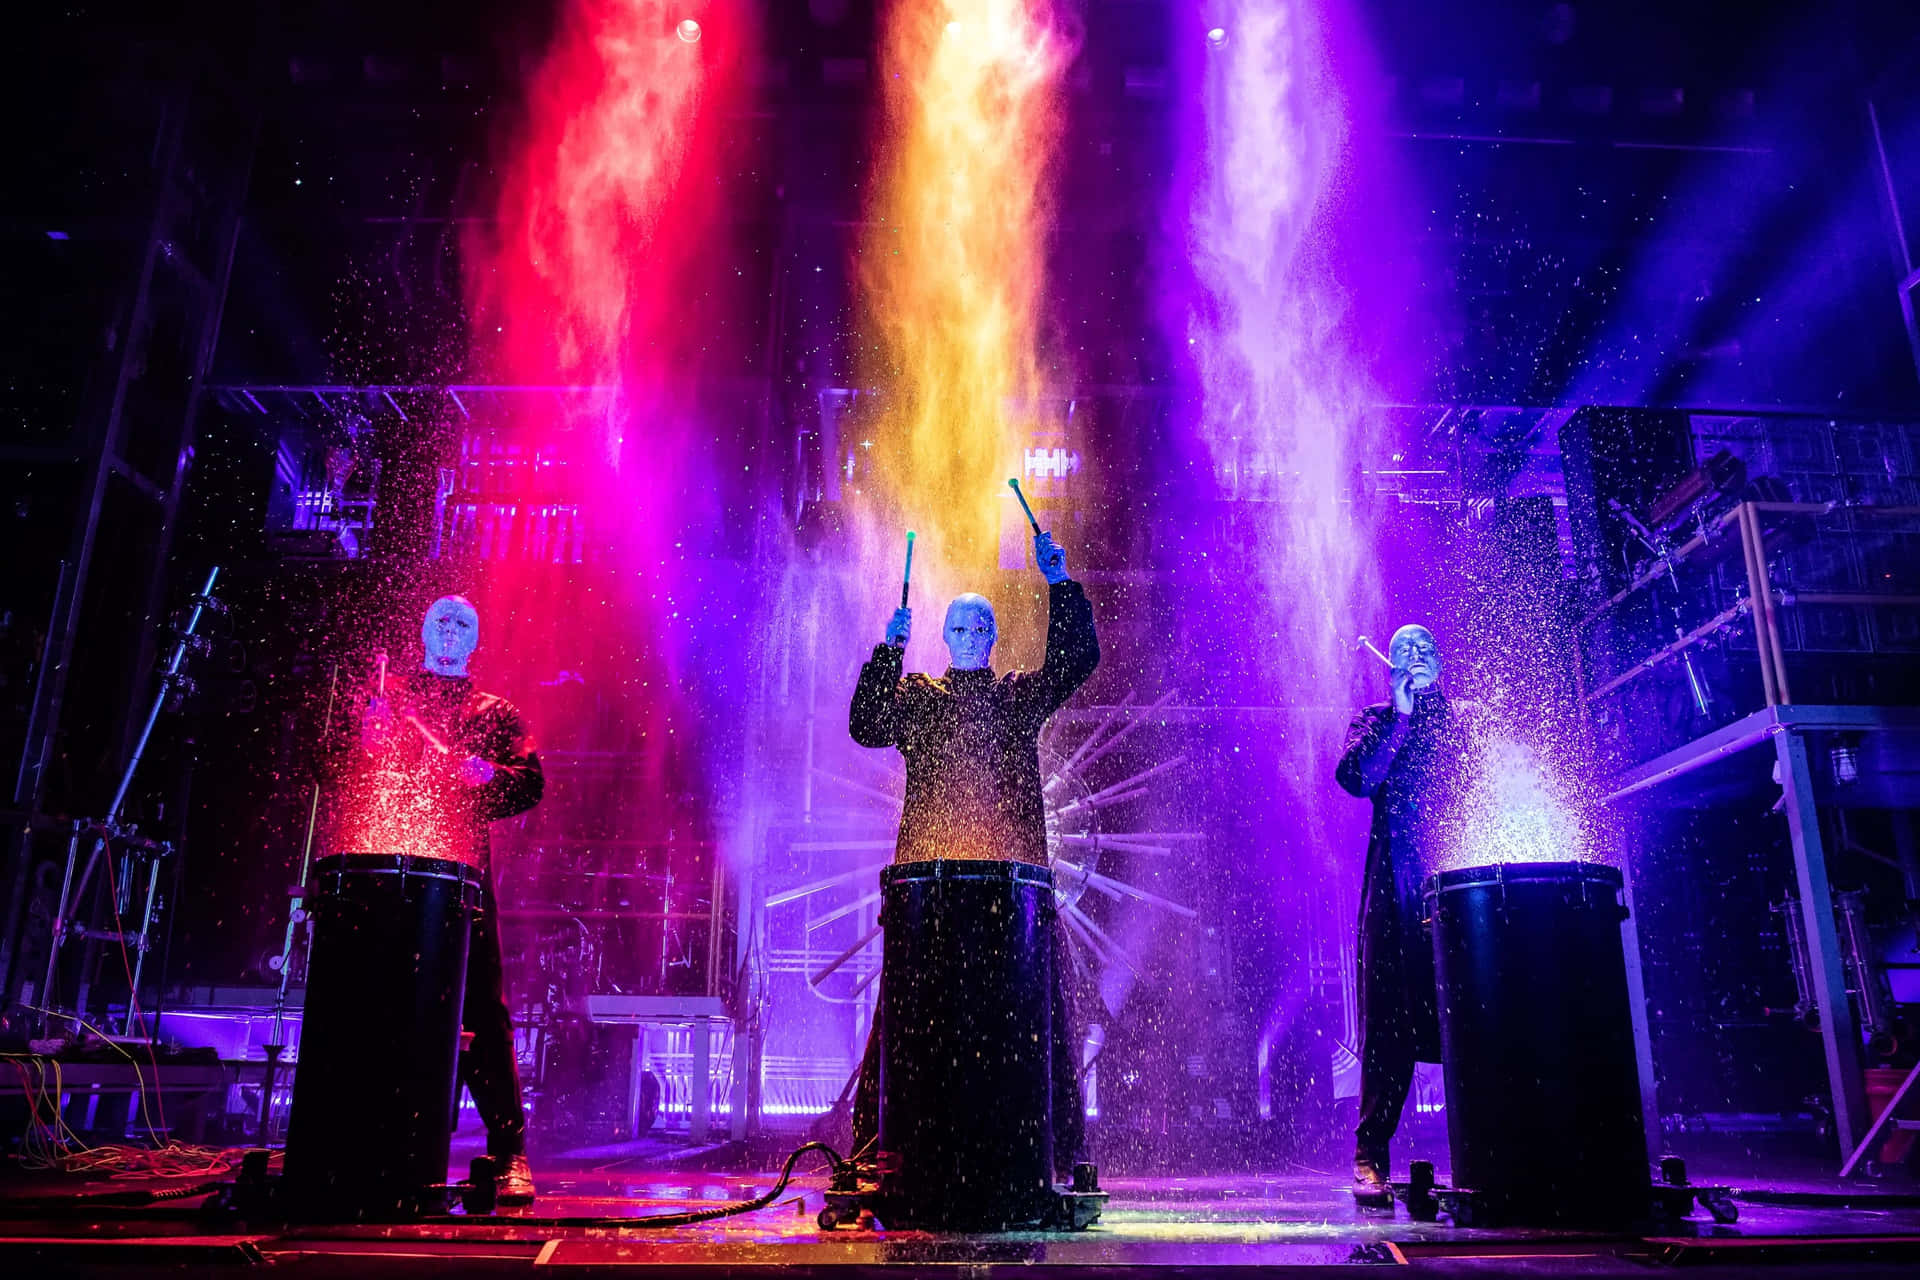 The Blue Man Group brings innovative performing arts to thrills worldwide!" Wallpaper